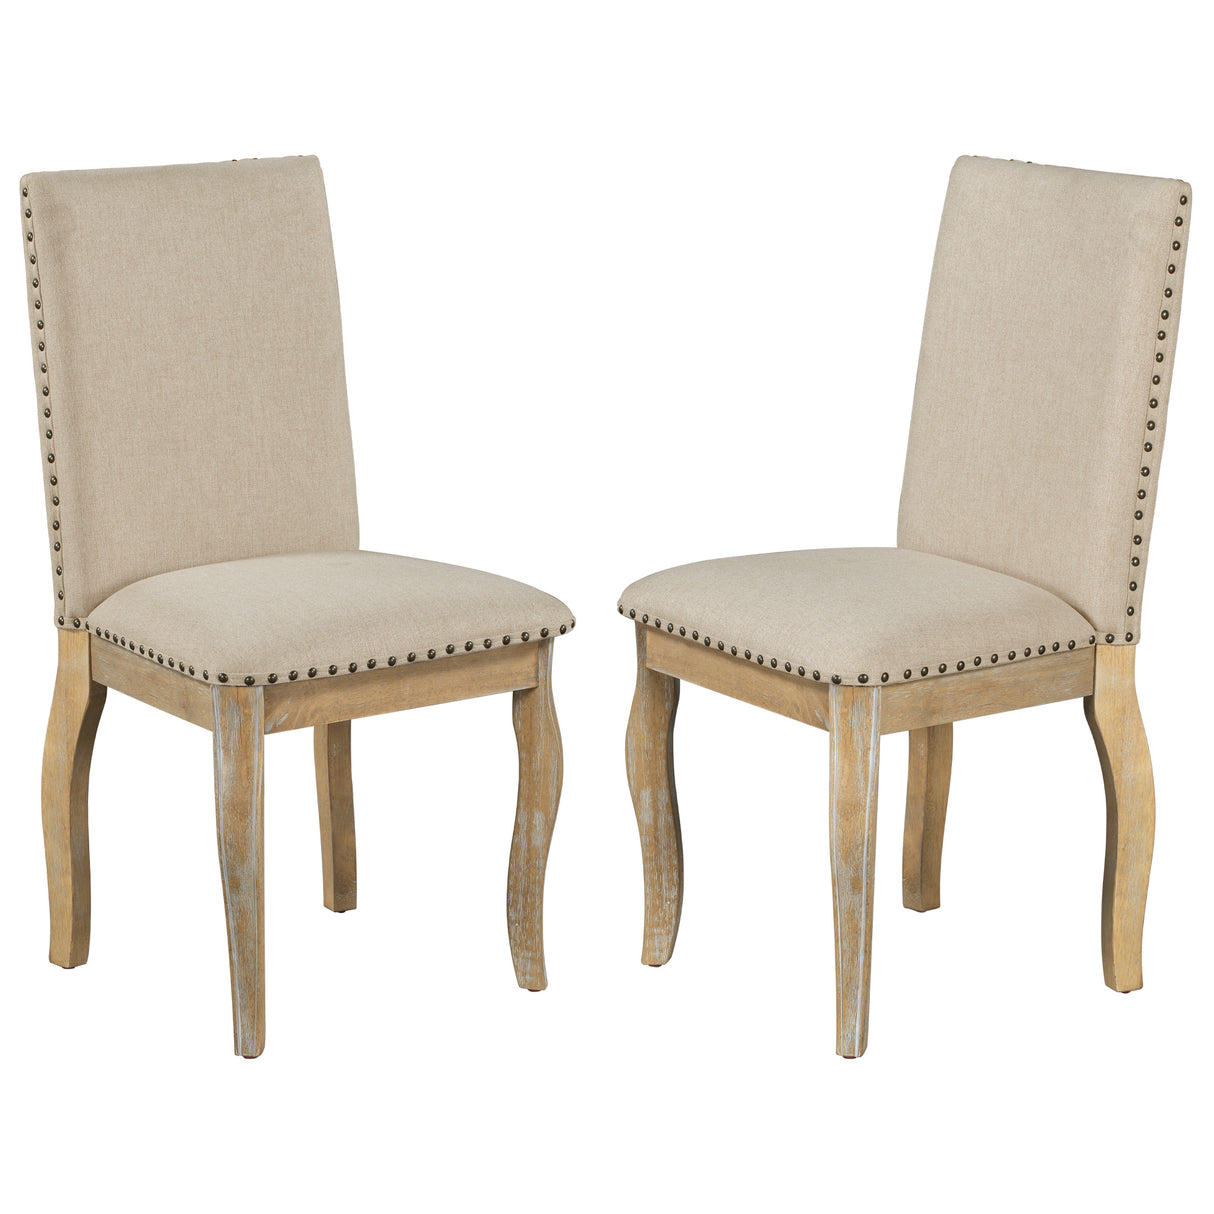 TREXM Set of 4 Dining chairs Wood Upholstered Fabirc Dining Room Chairs with Nailhead (Natural Wood Wash) - Home Elegance USA